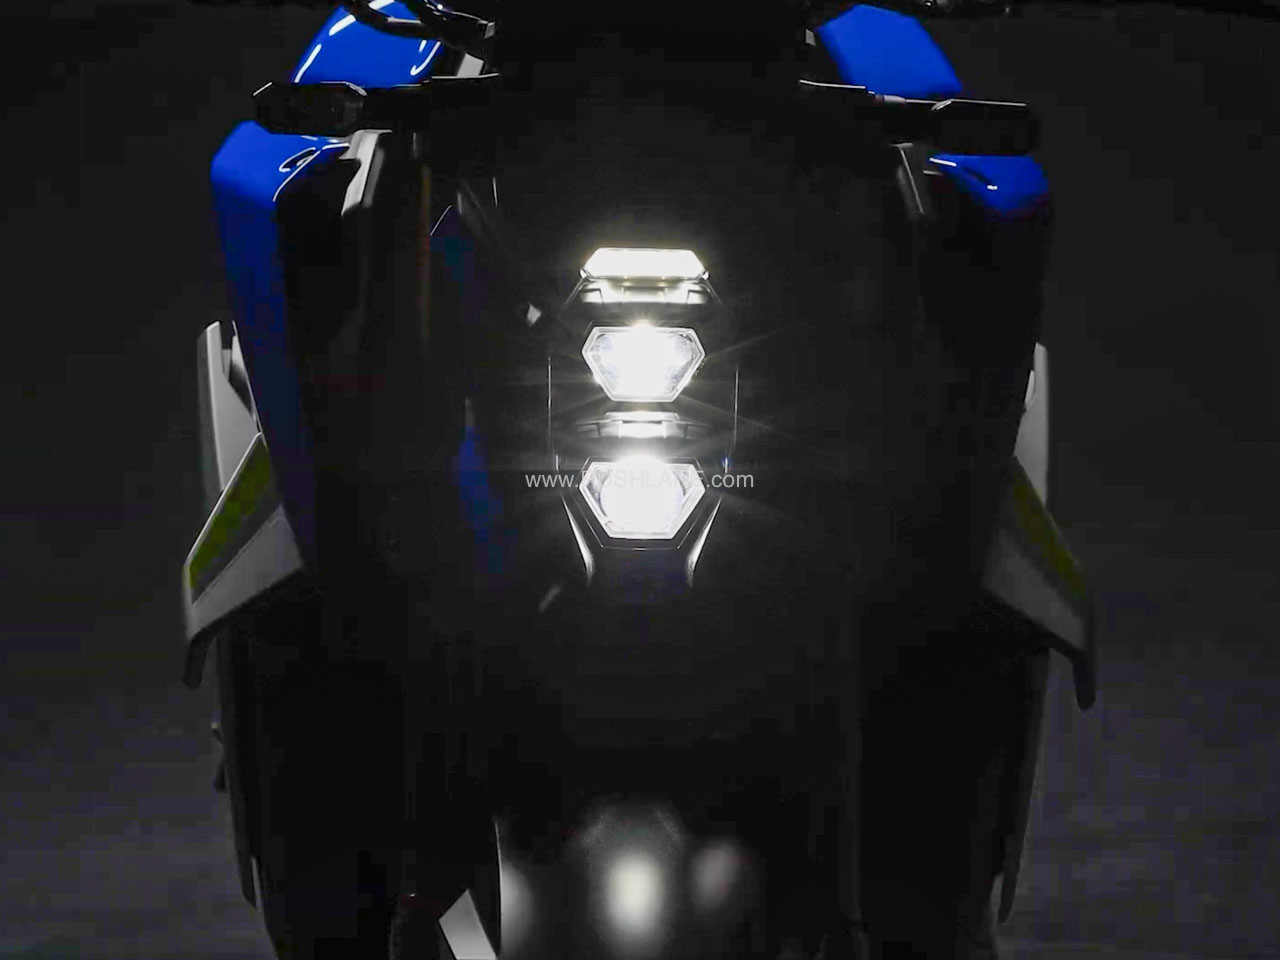 21 Suzuki Gsx S1000 Teased To Come With Updated Aesthetics